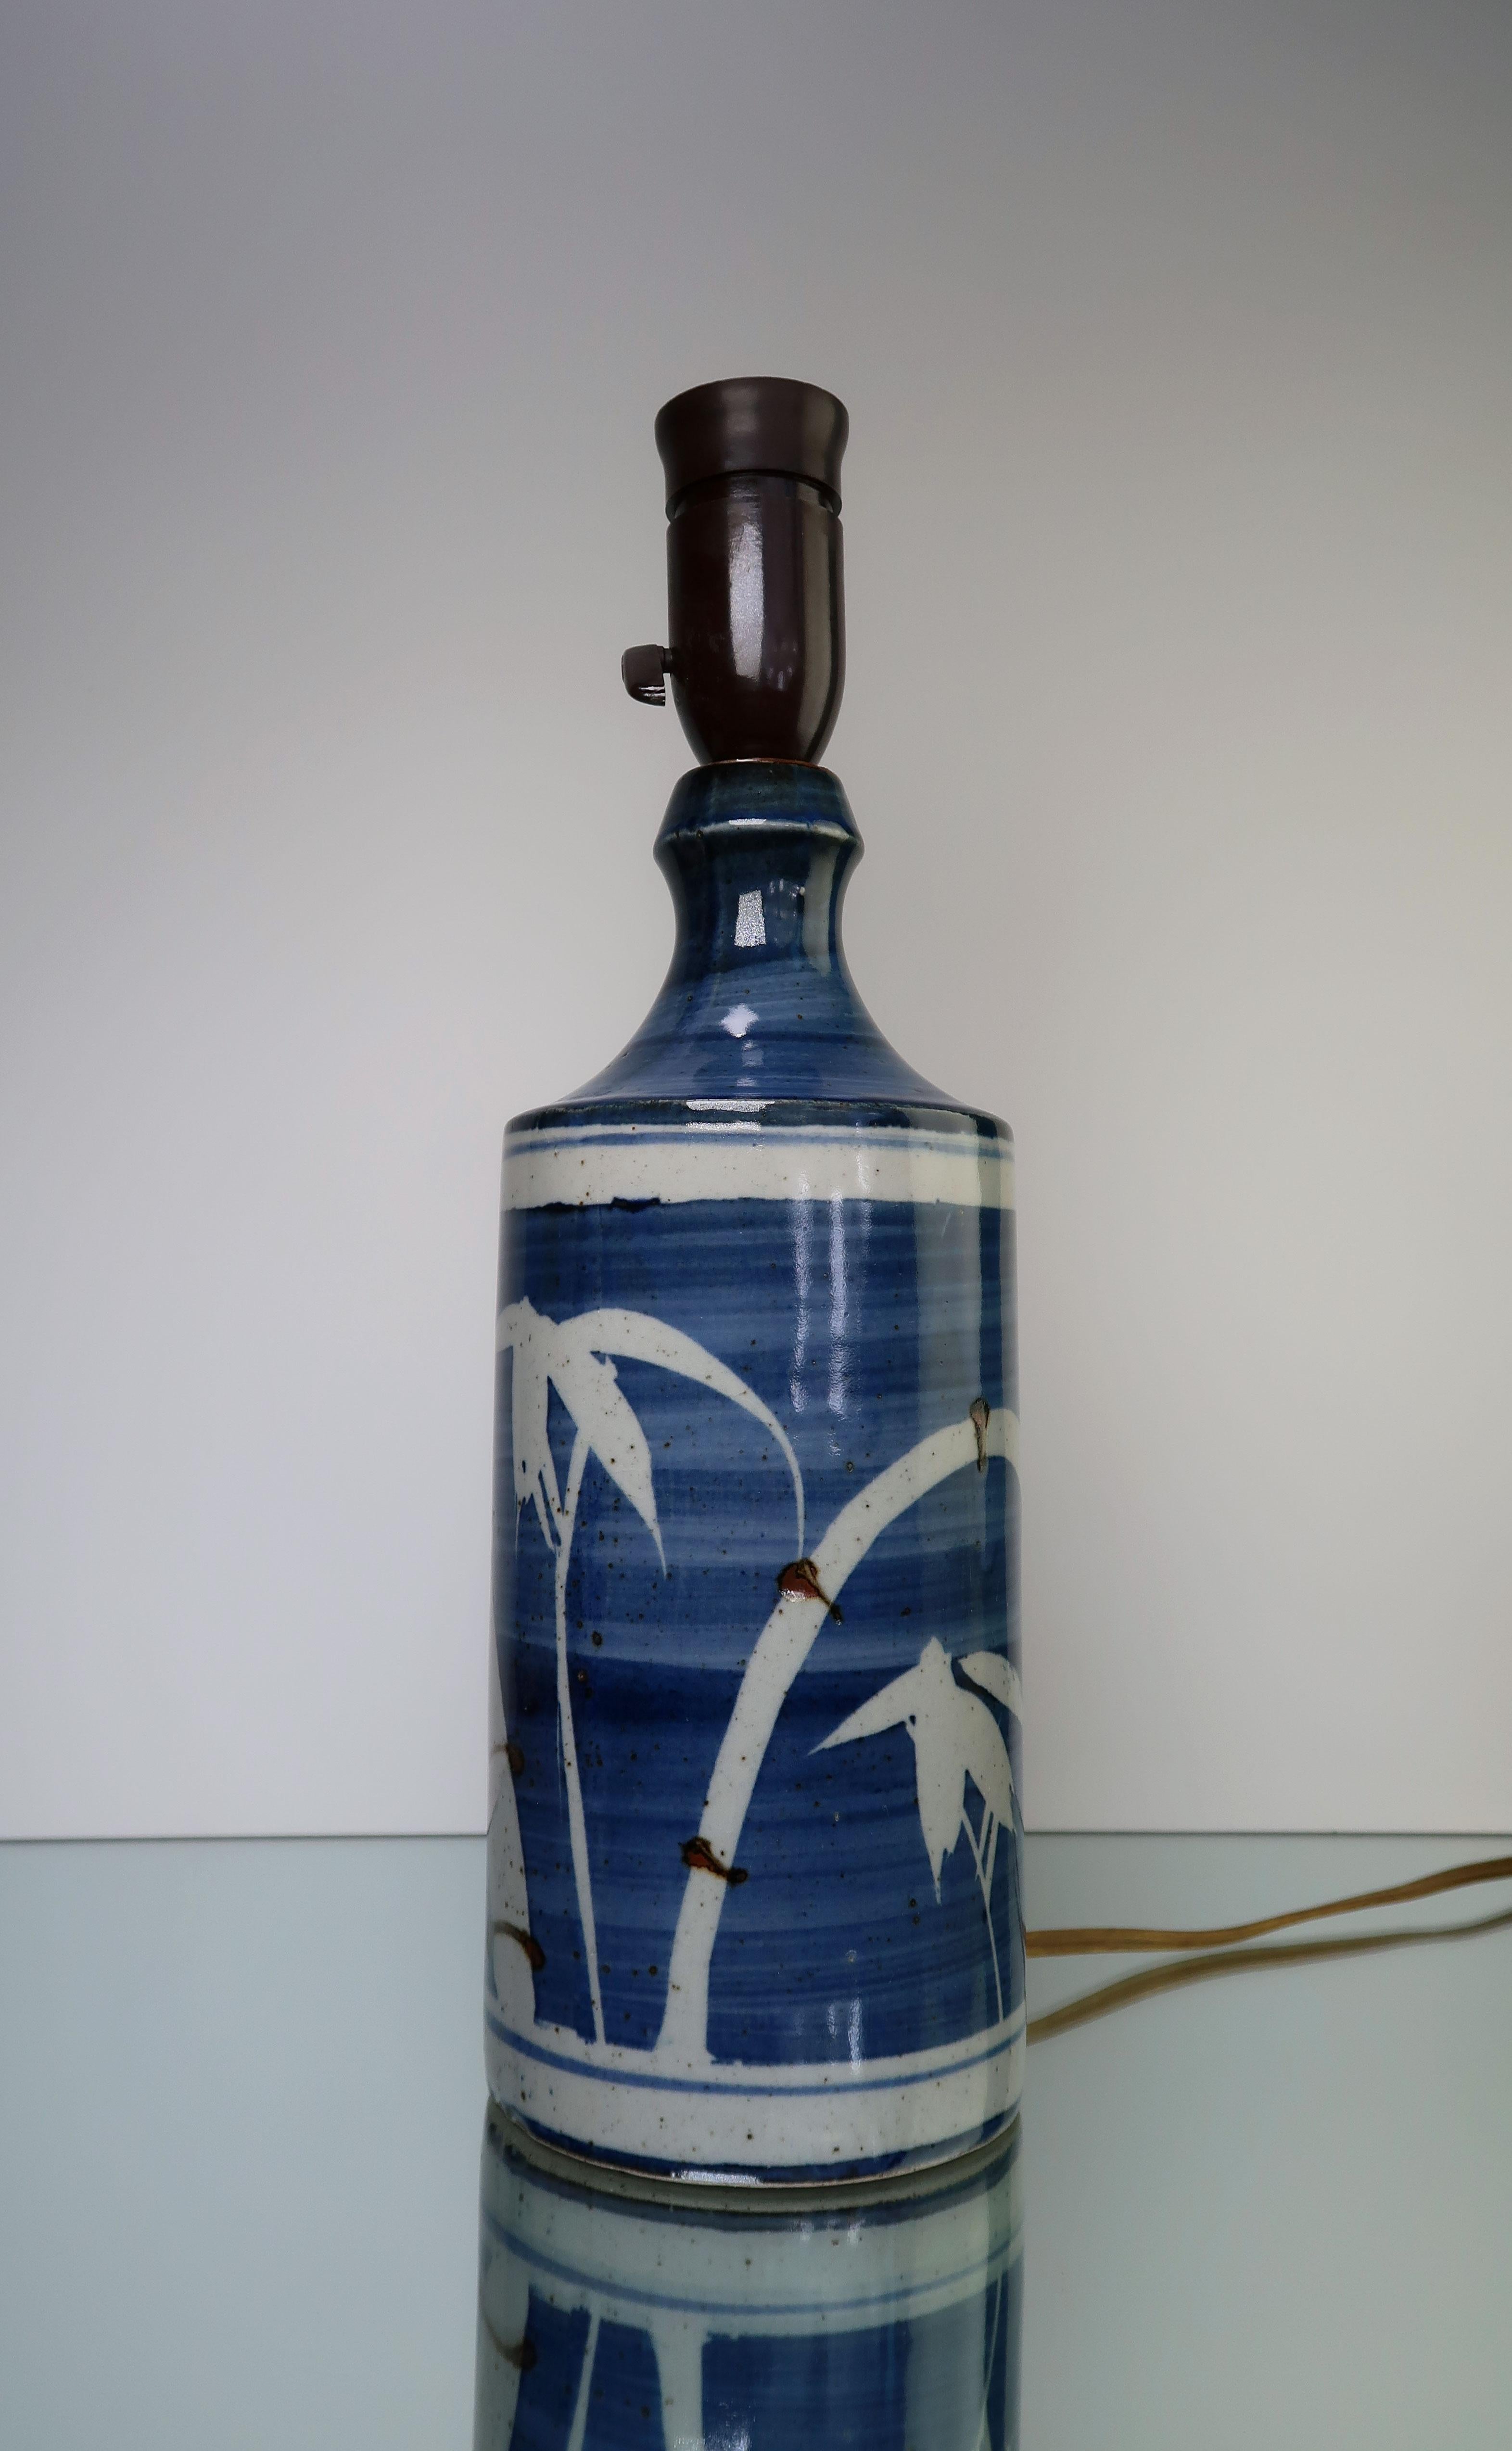 Distant shores. Japanese, tropical style Scandinavian Modern ceramic table lamp with glaze in white, light and dark blue. White palm trees over blue striped glaze with chocolate brown accents. Original fitting with switch. Beautiful vintage